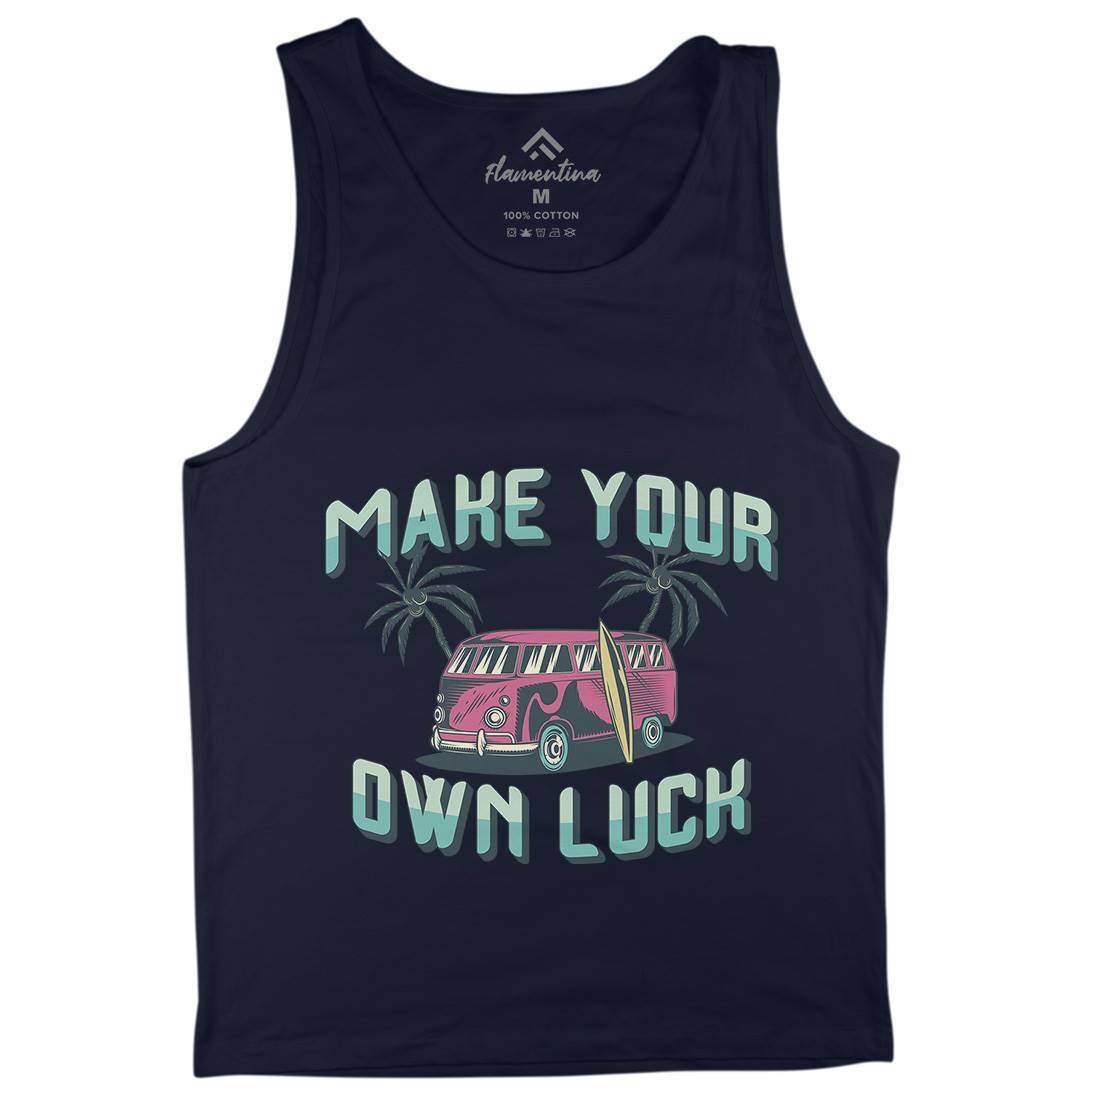 Make Your Own Luck Mens Tank Top Vest Nature B307